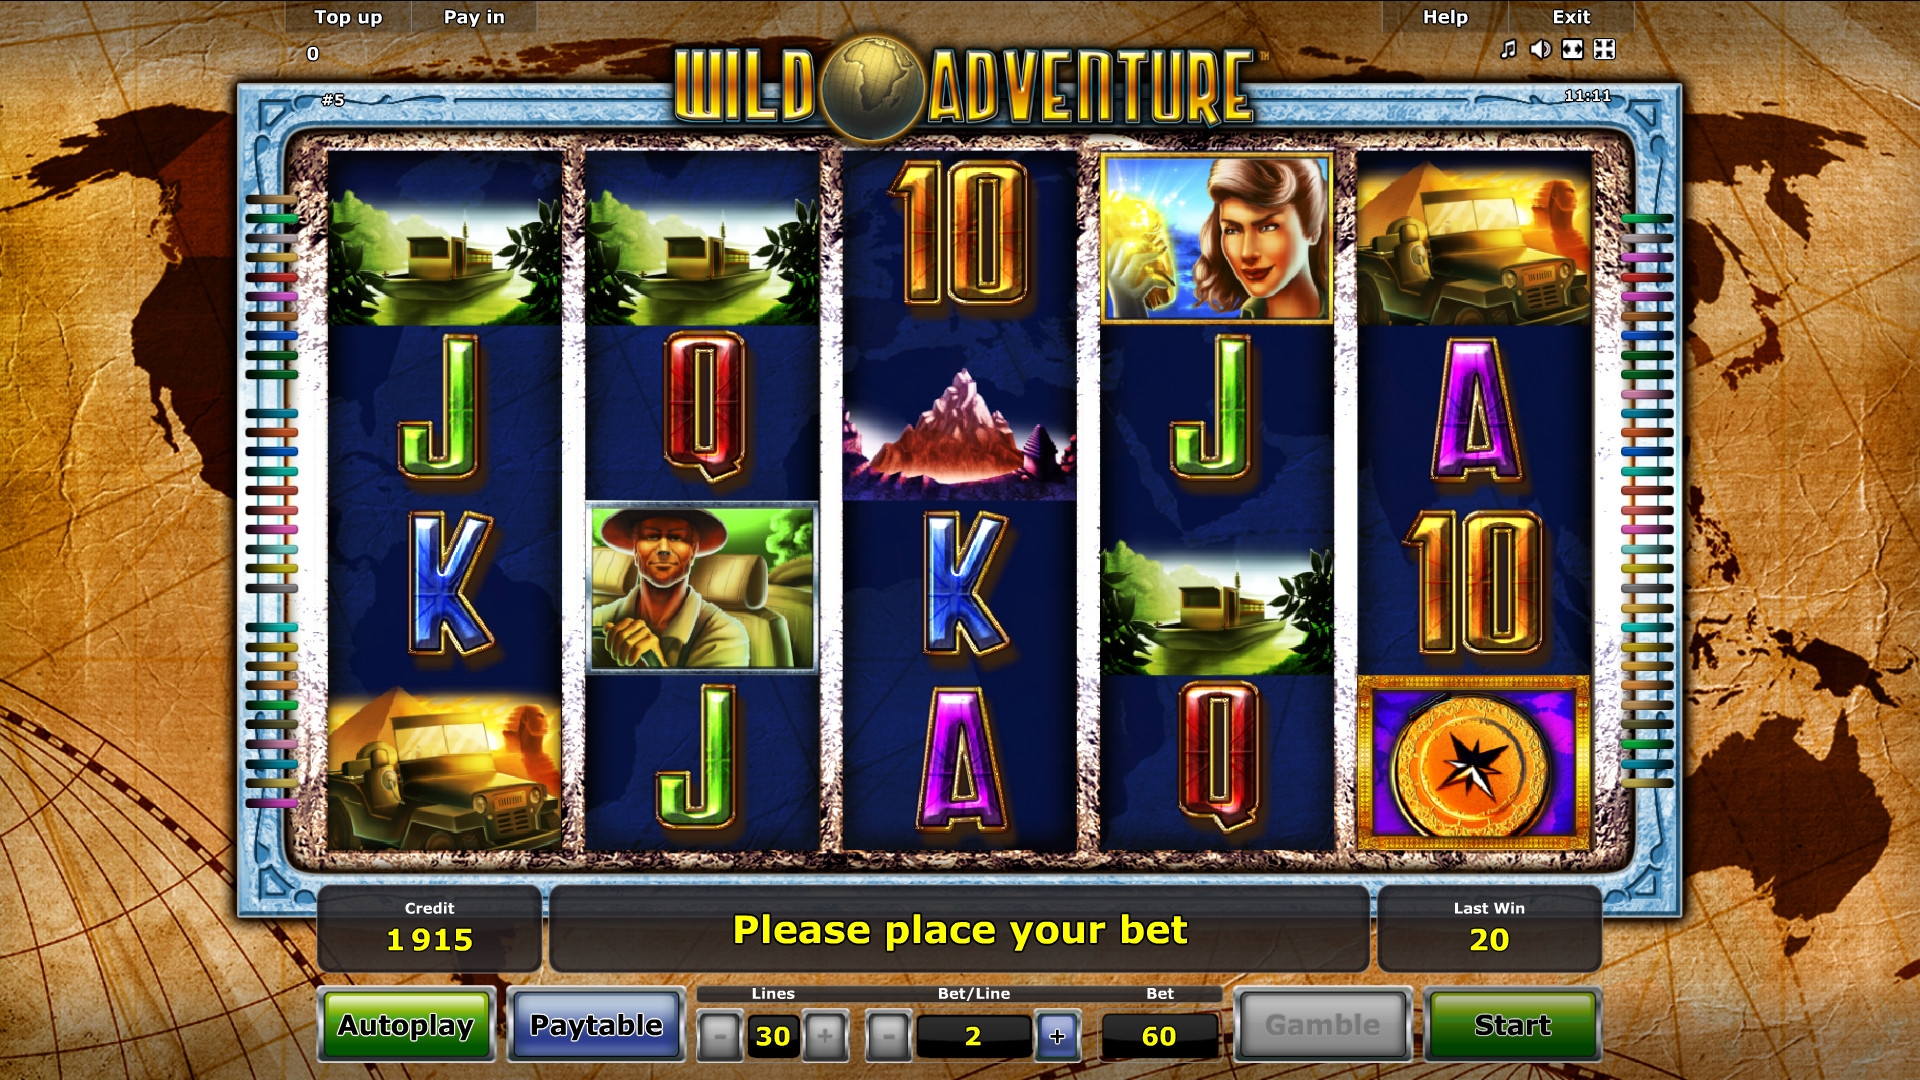 Wild Adventure (Wild Adventure) from category Slots